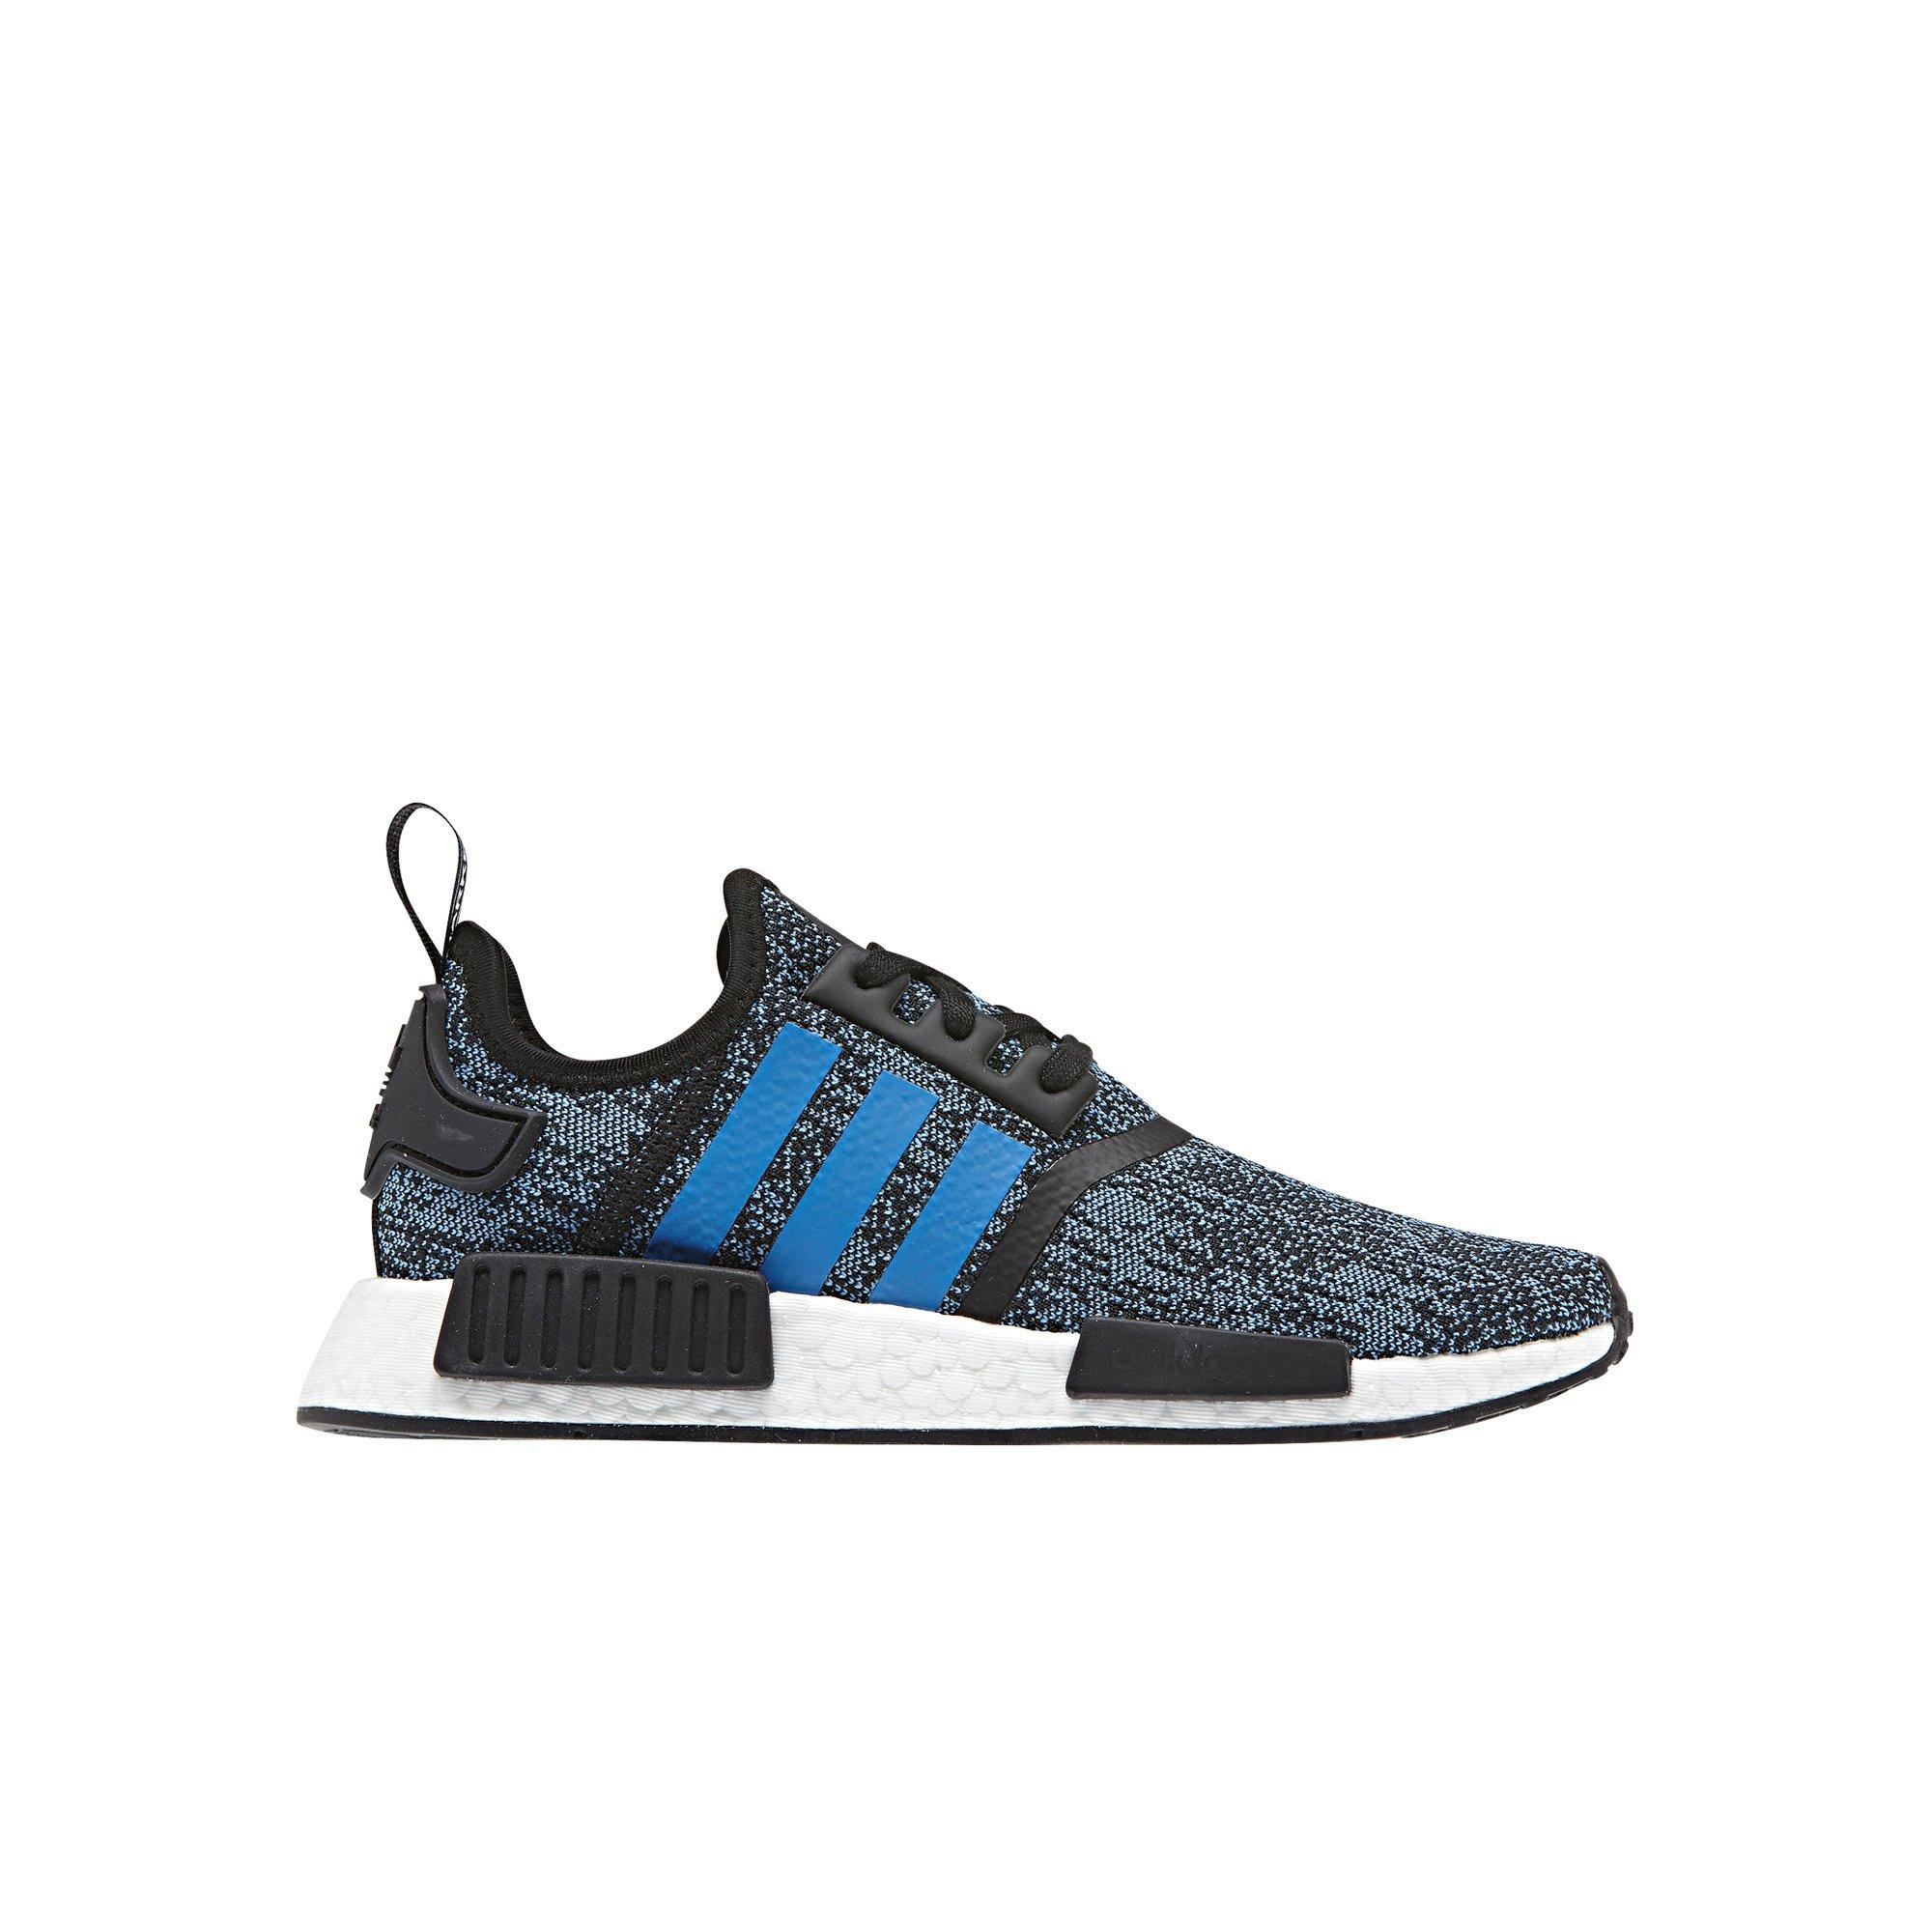 adidas nmd xr1 youth size